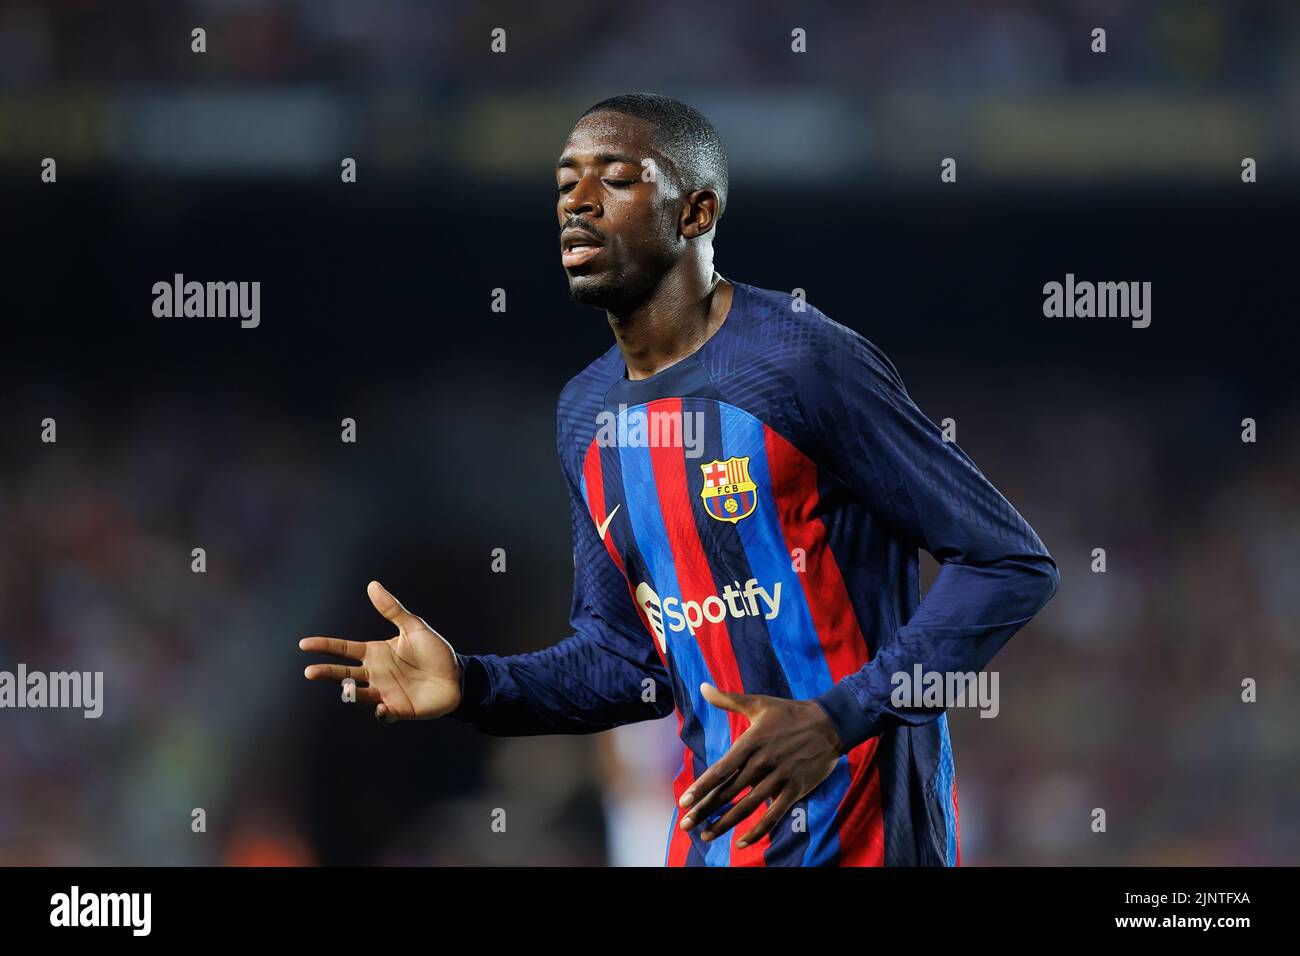 Barcelona, Spain. 13th Aug, 2022. Dembele in action during the La Liga match between FC Barcelona and Rayo Vallecano at the Spotify Camp Nou Stadium in Barcelona, Spain. Credit: Christian Bertrand/Alamy Live News Stock Photo